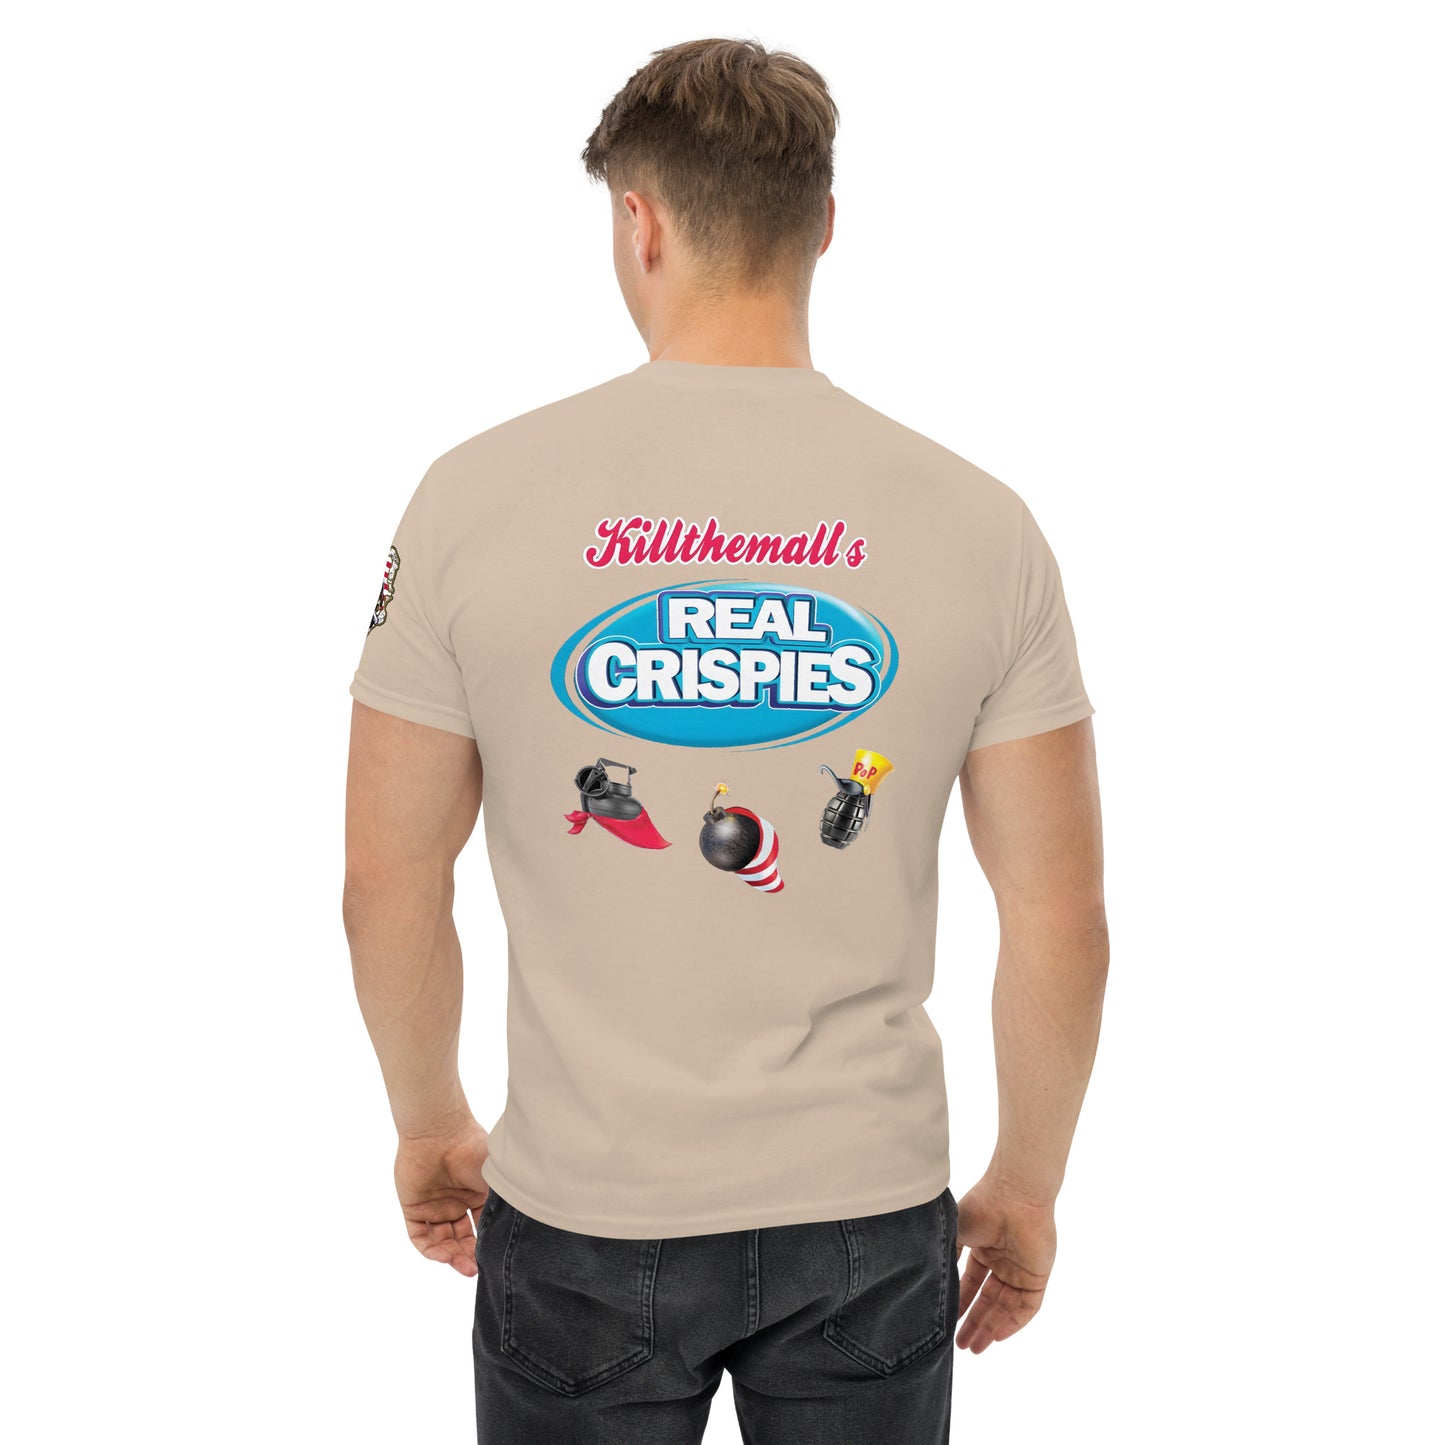 Real Crispies